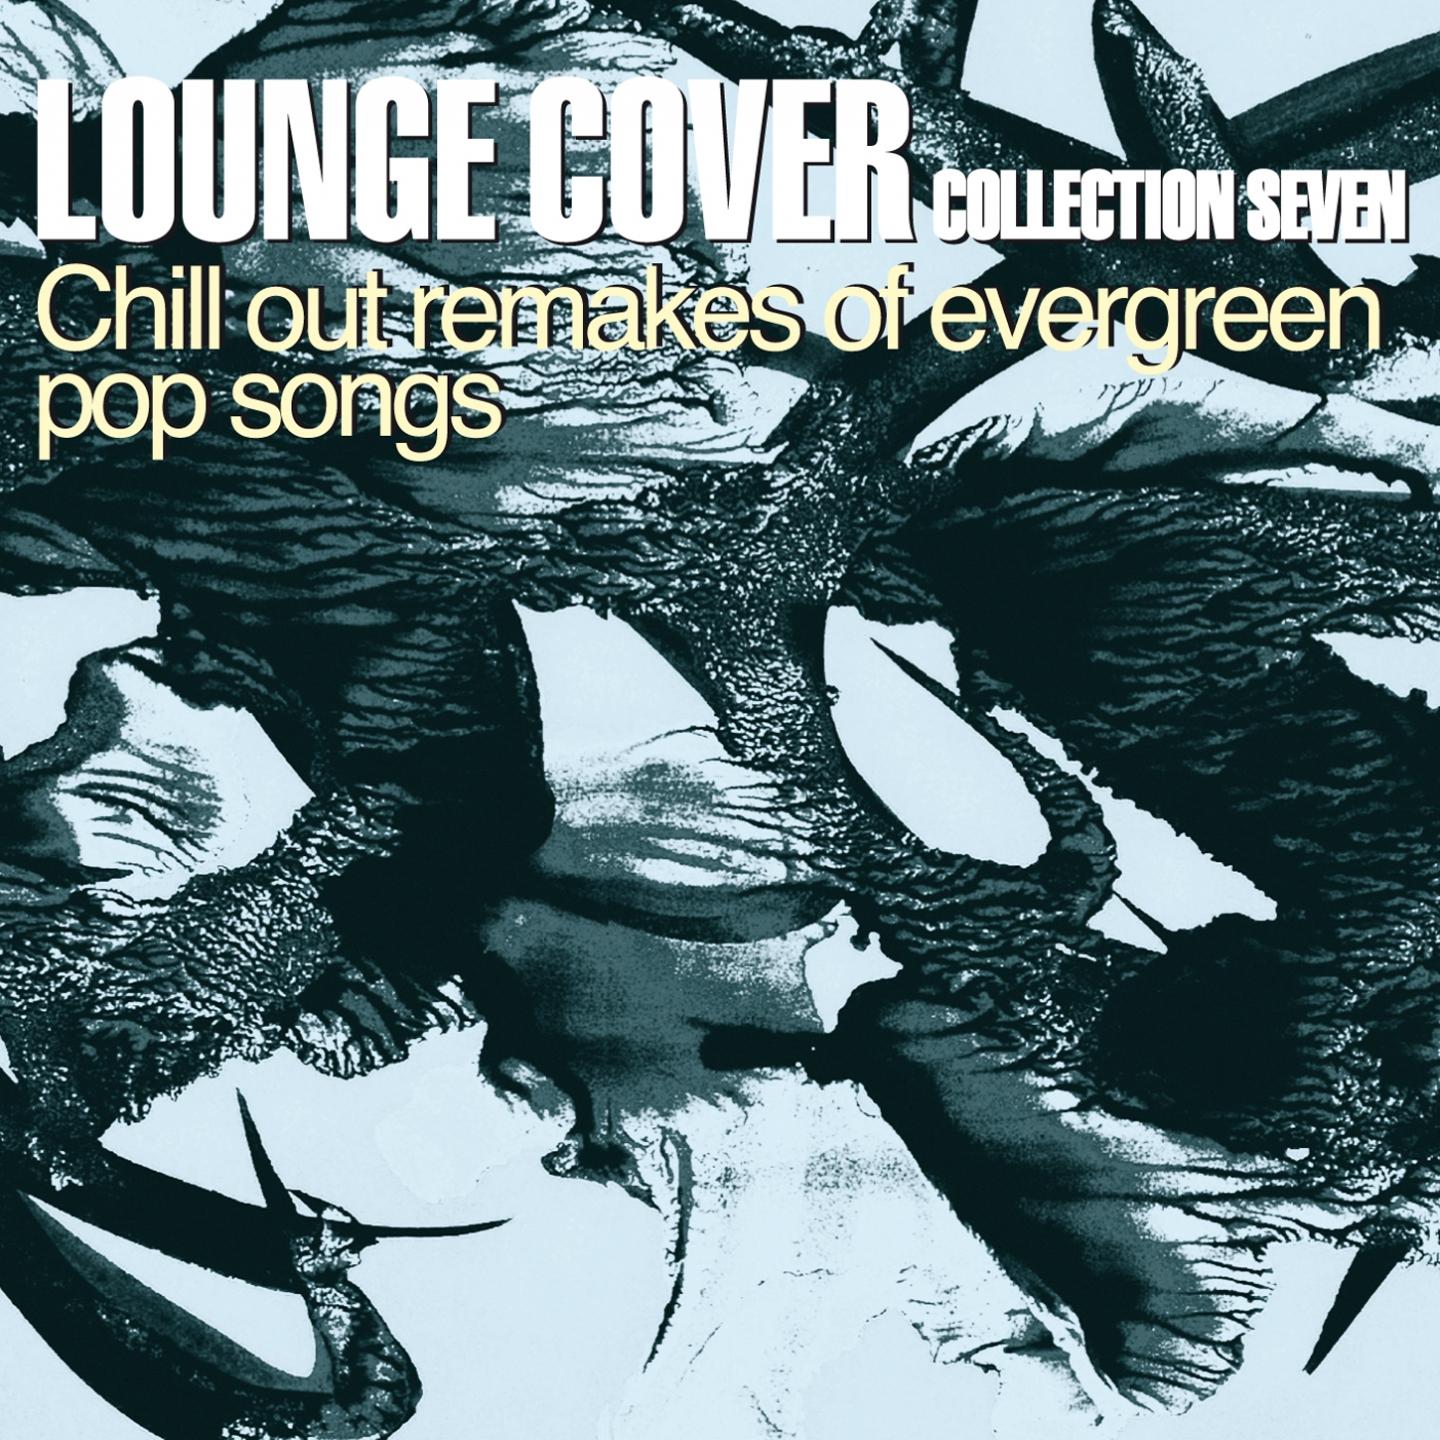 Lounge Cover Collection Seven (Chill Out Remakes of Evergreen Pop Songs)